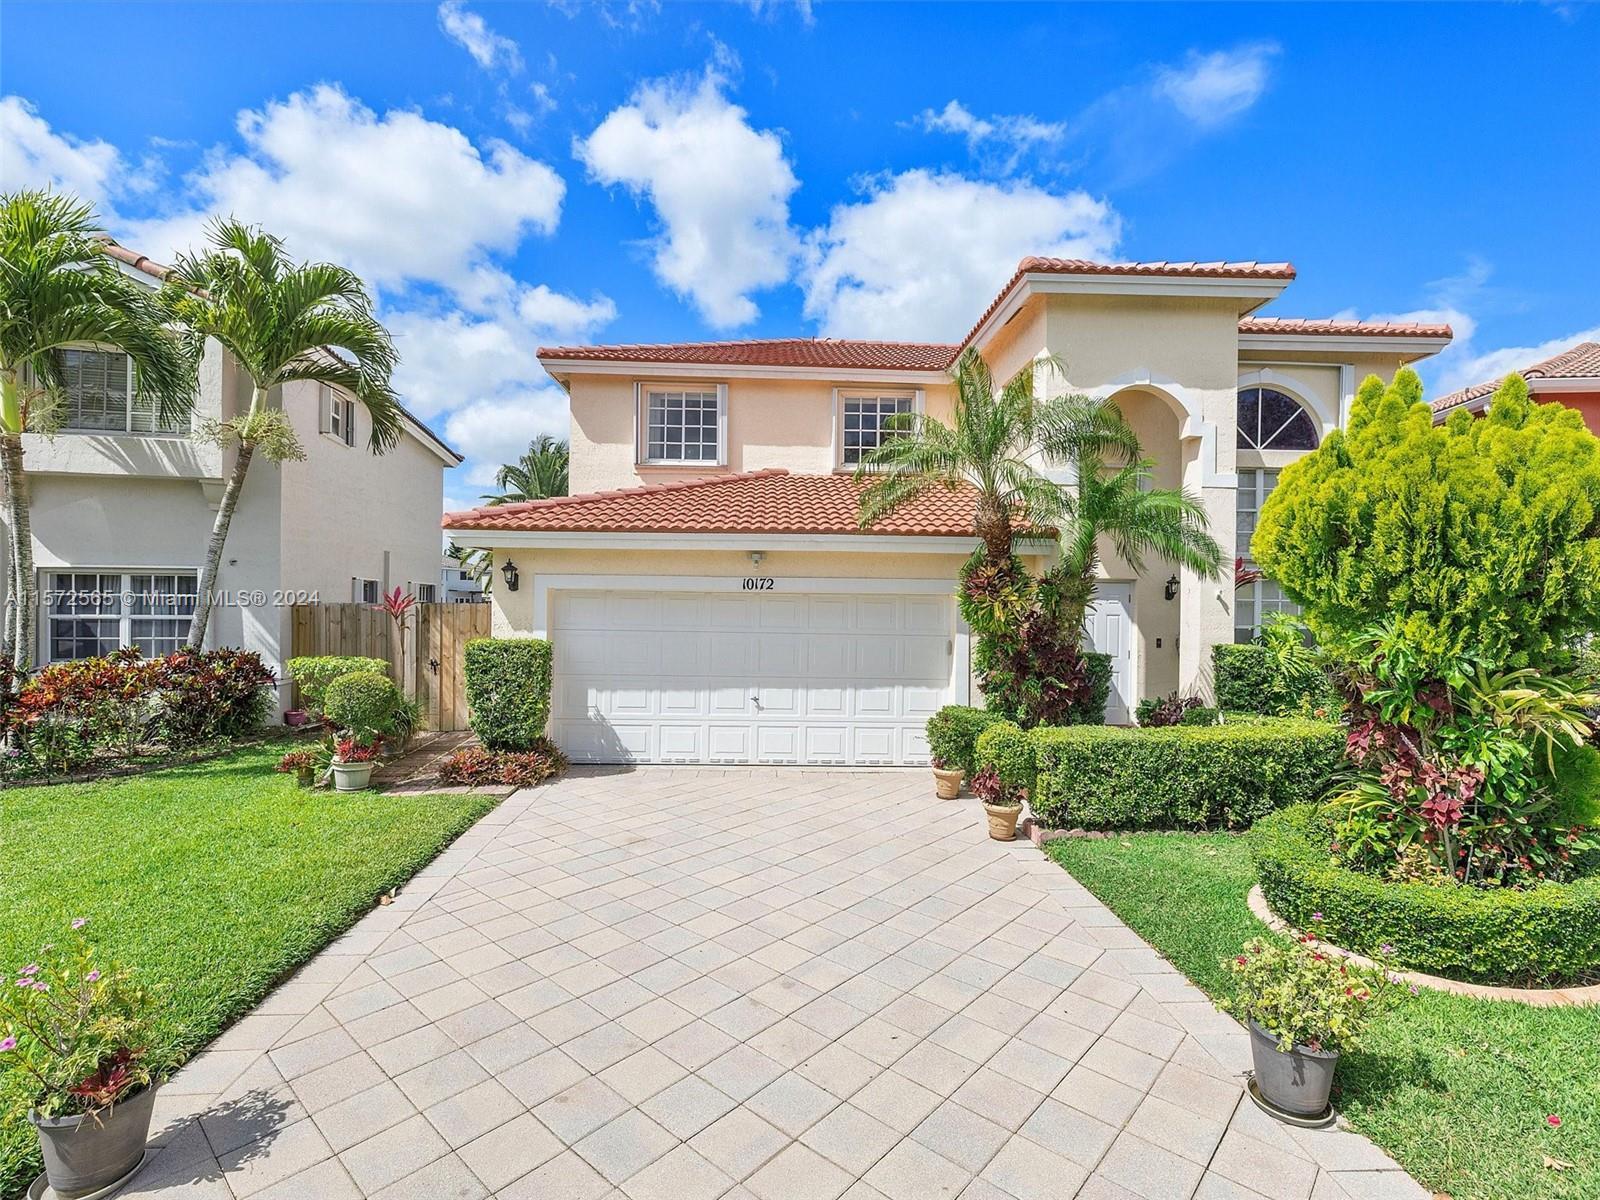 Located in West Kendall's Forest Lakes community, this exceptional 5/3 home features fantastic lake 